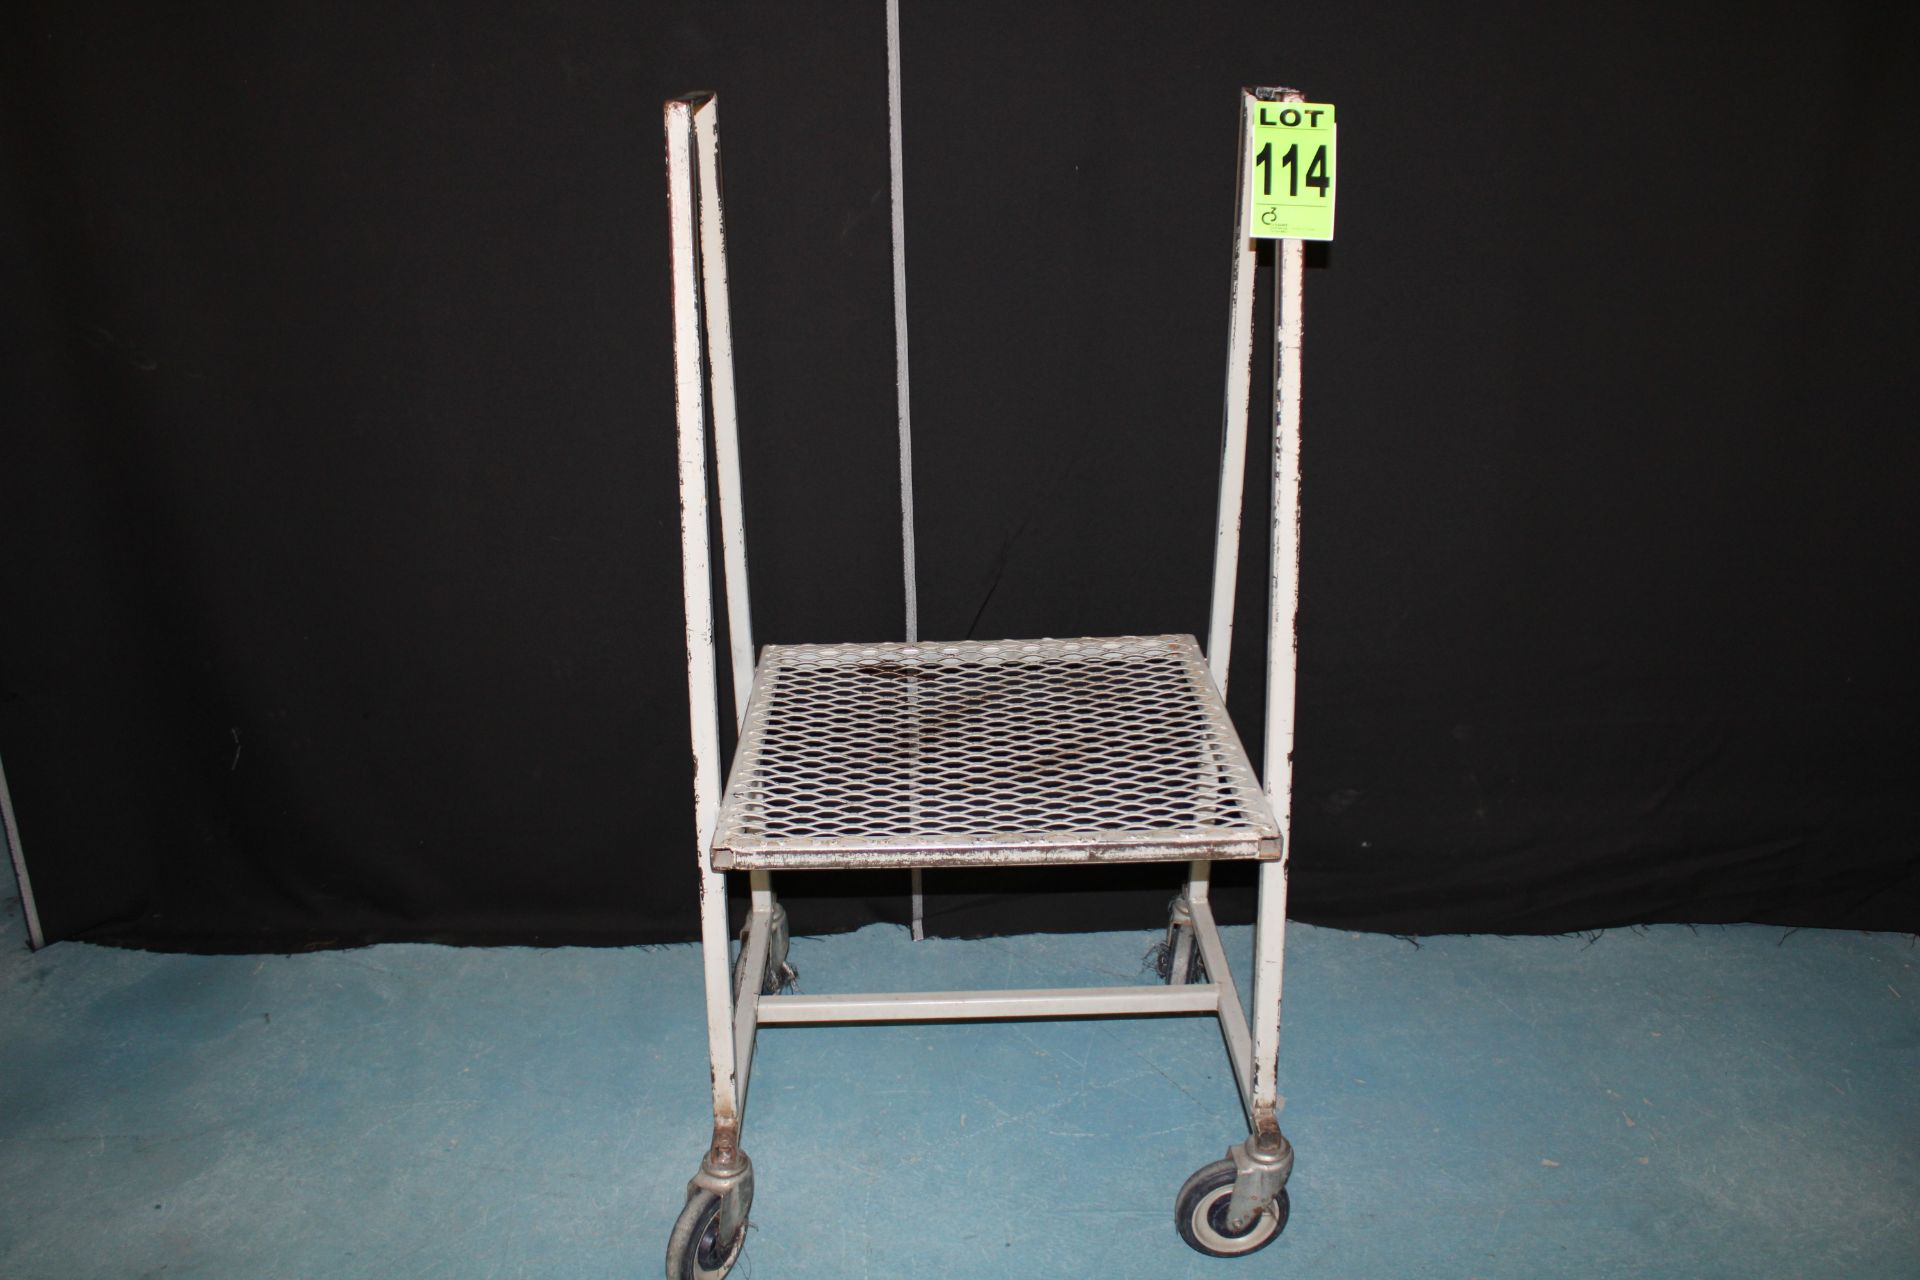 Lot of (6) steel carts with casters, for stackable material, dark grey